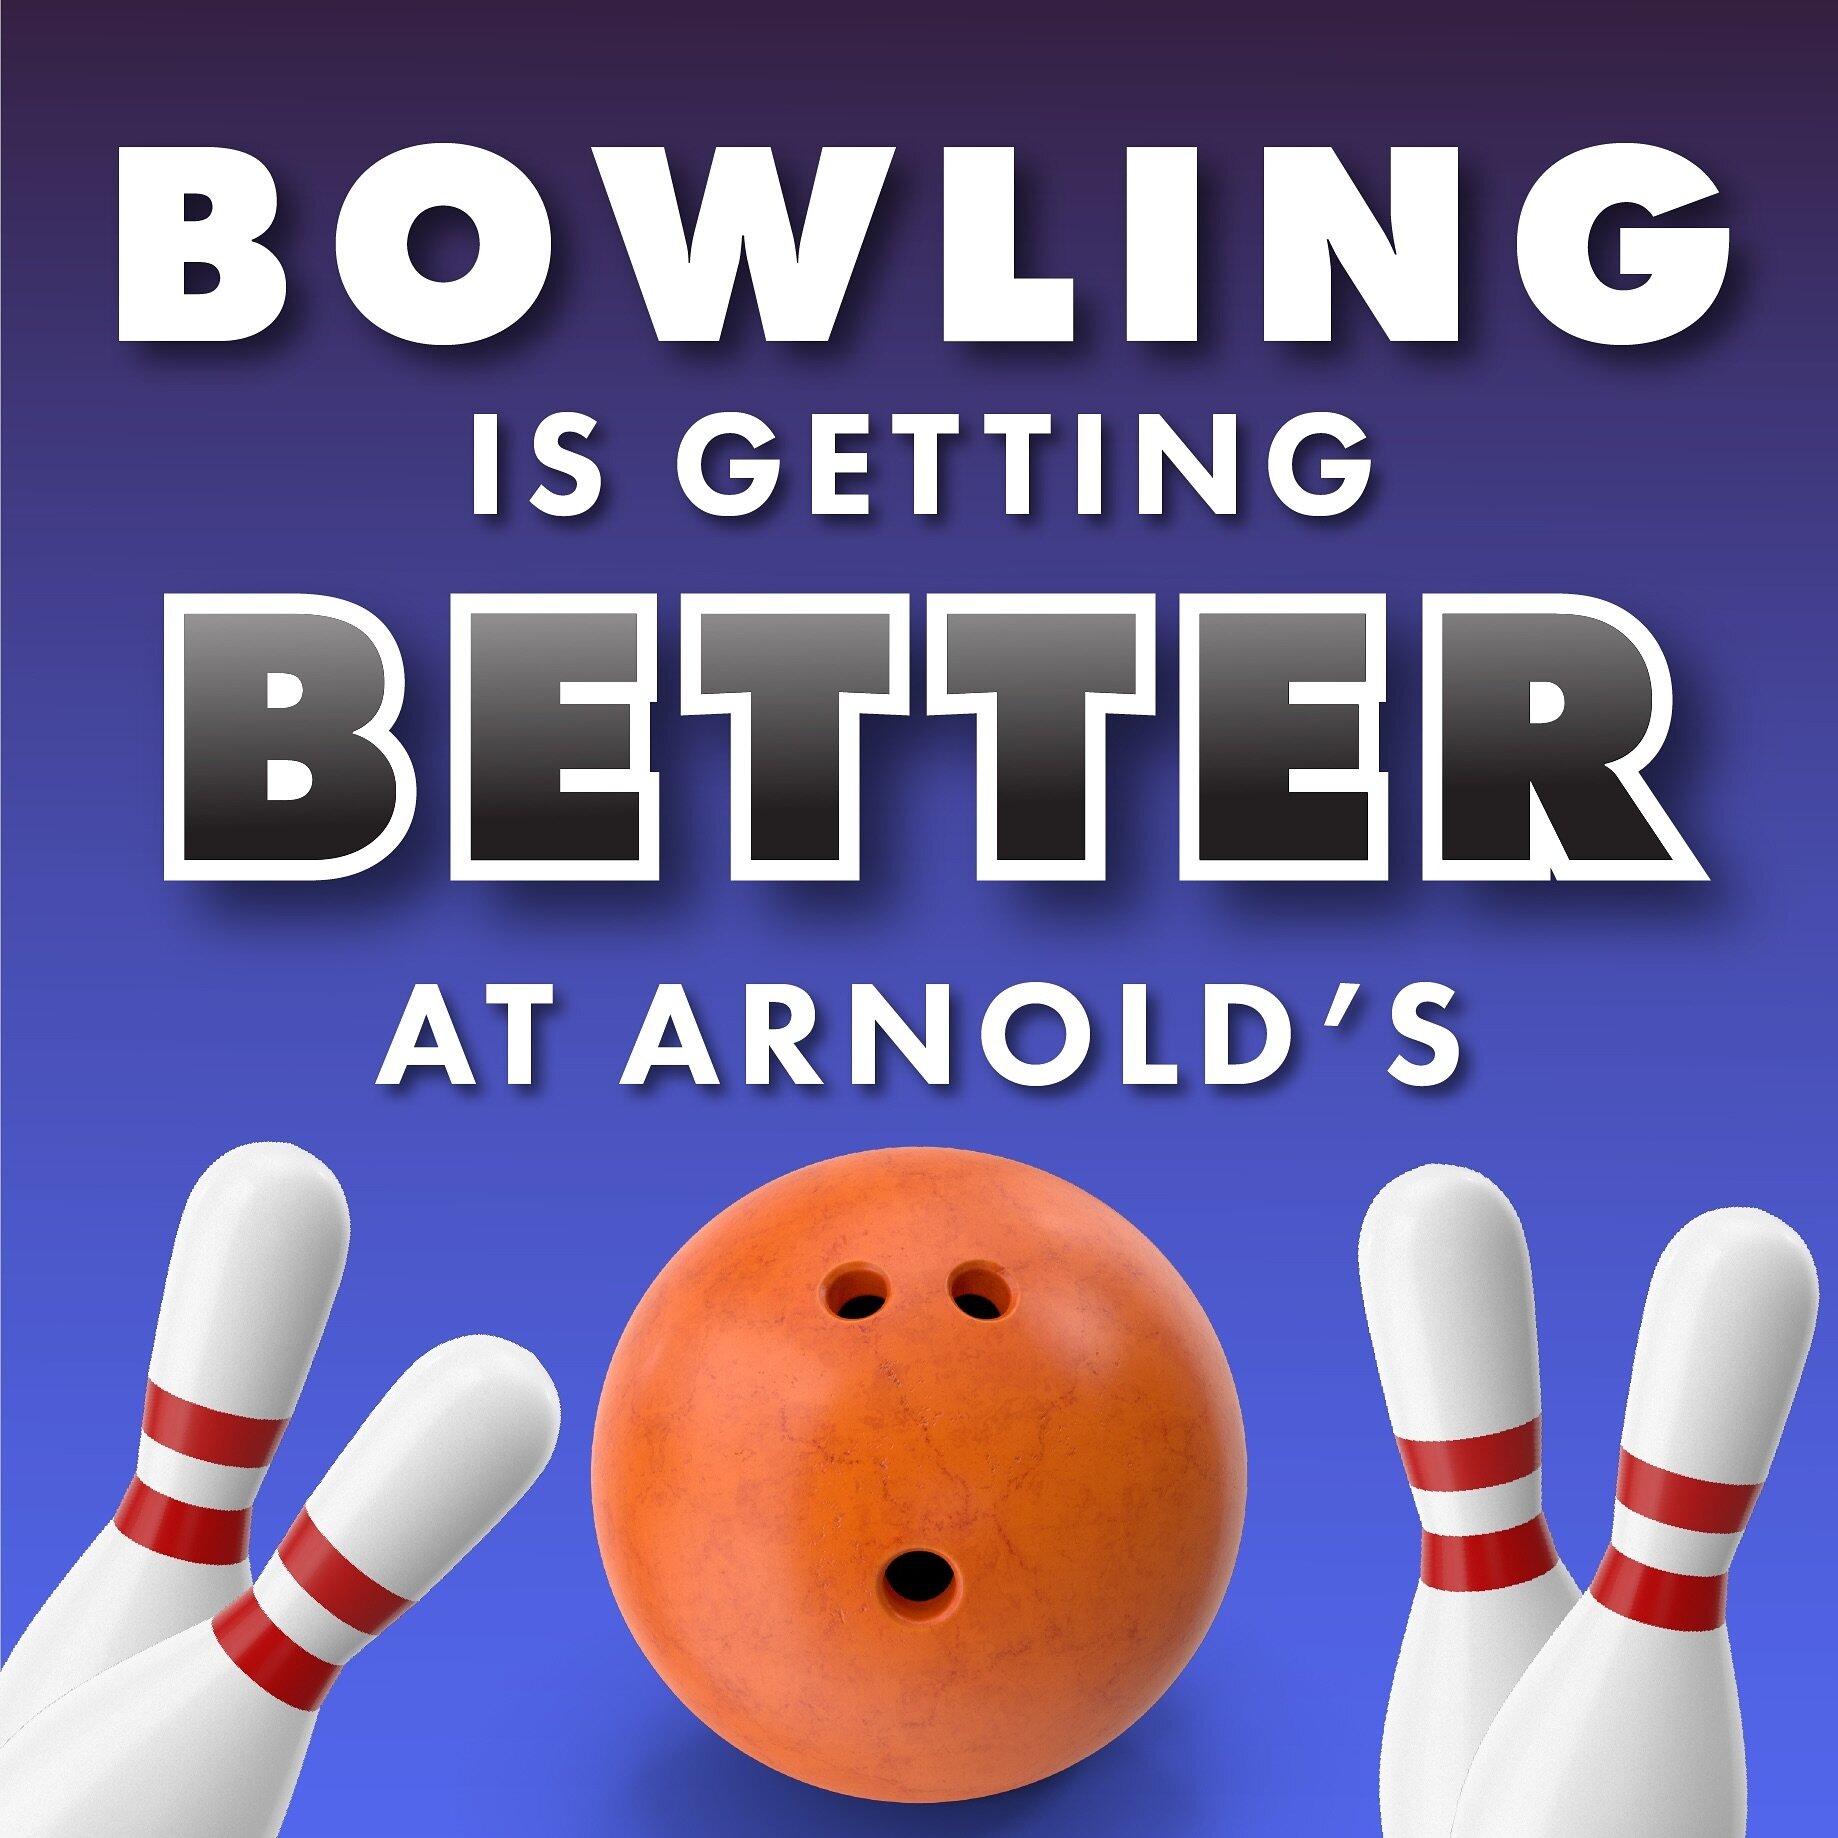 ‼️MARCH 27 2024‼️ Today we will be operating at a limited bowling capacity due to some new upgrades! 

🎳Bowling is getting better at Arnold&rsquo;s&hellip;. We are currently upgrading our Pinspotters!

🏎️ Go Karts
🎳 Bowling
🧗&zwj;♂️ Climbing + Ro